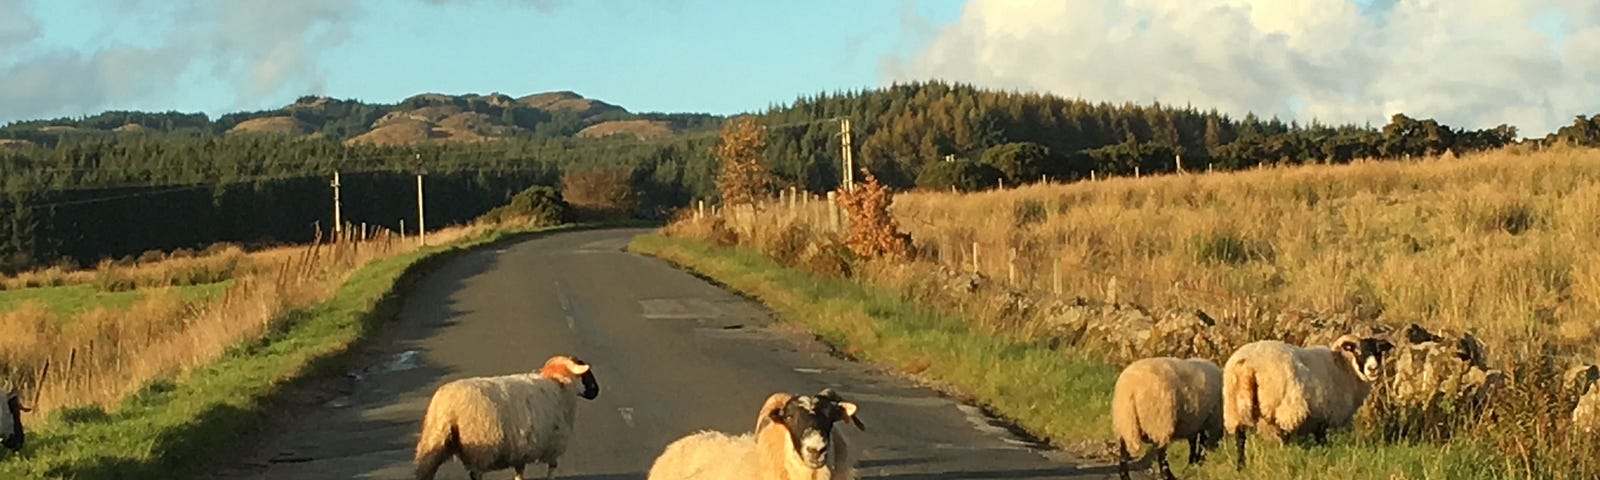 Sheep on the road in Scotland